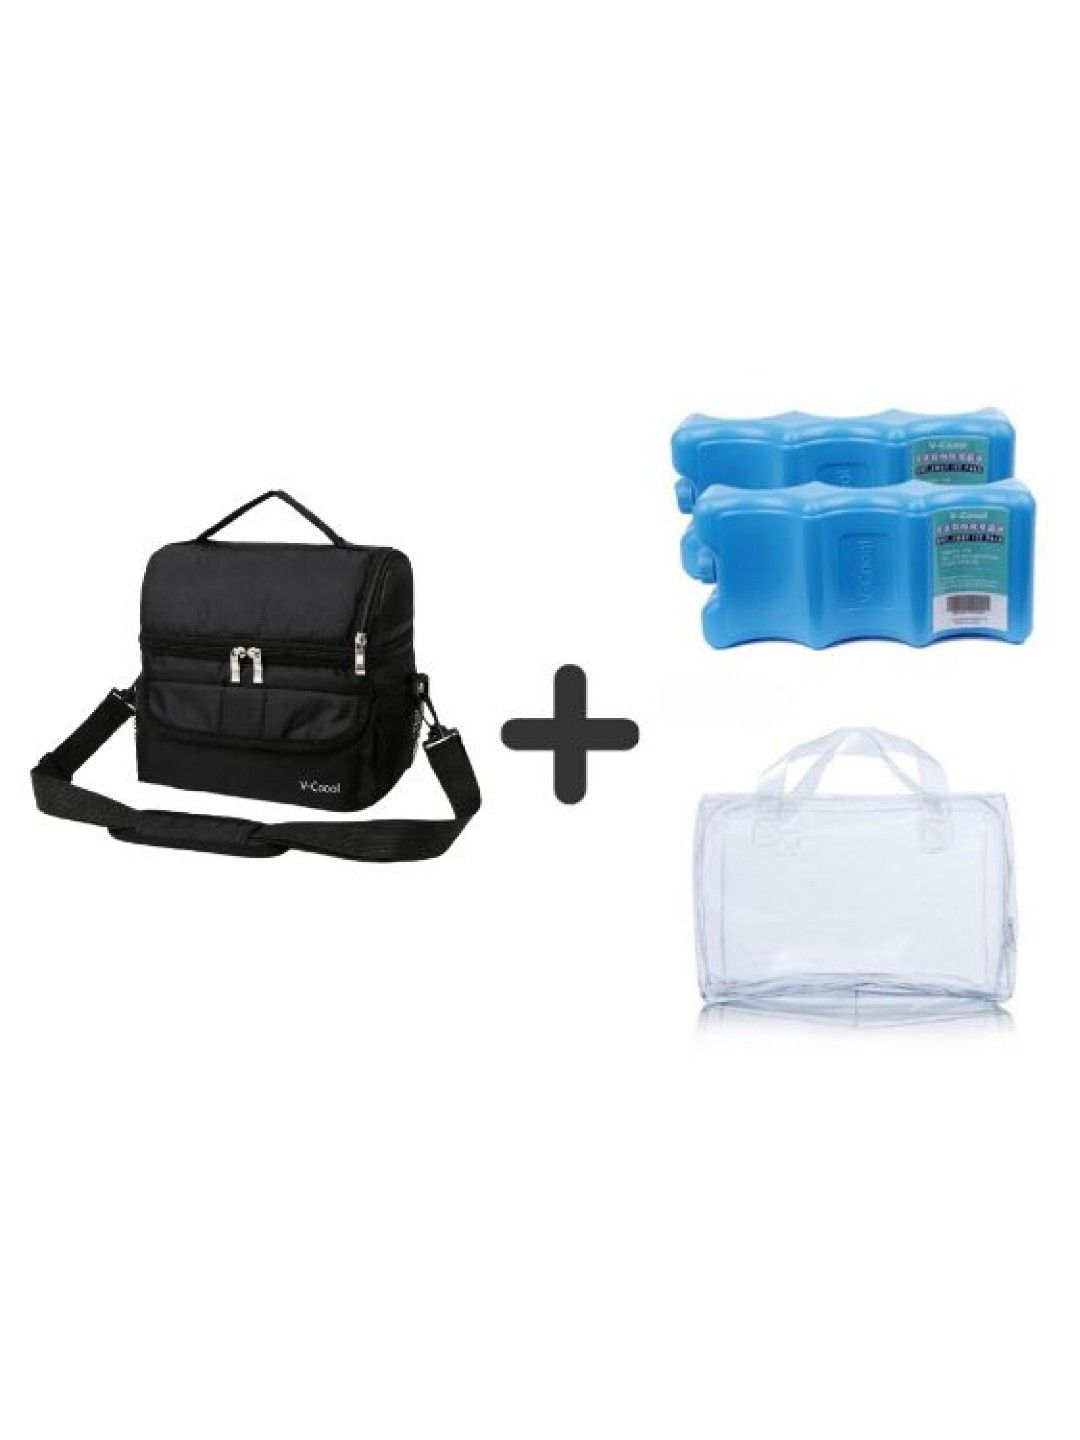 V-coool Thermal Cooler Tote Insulated Bag with Ice Bricks & PVC Bag